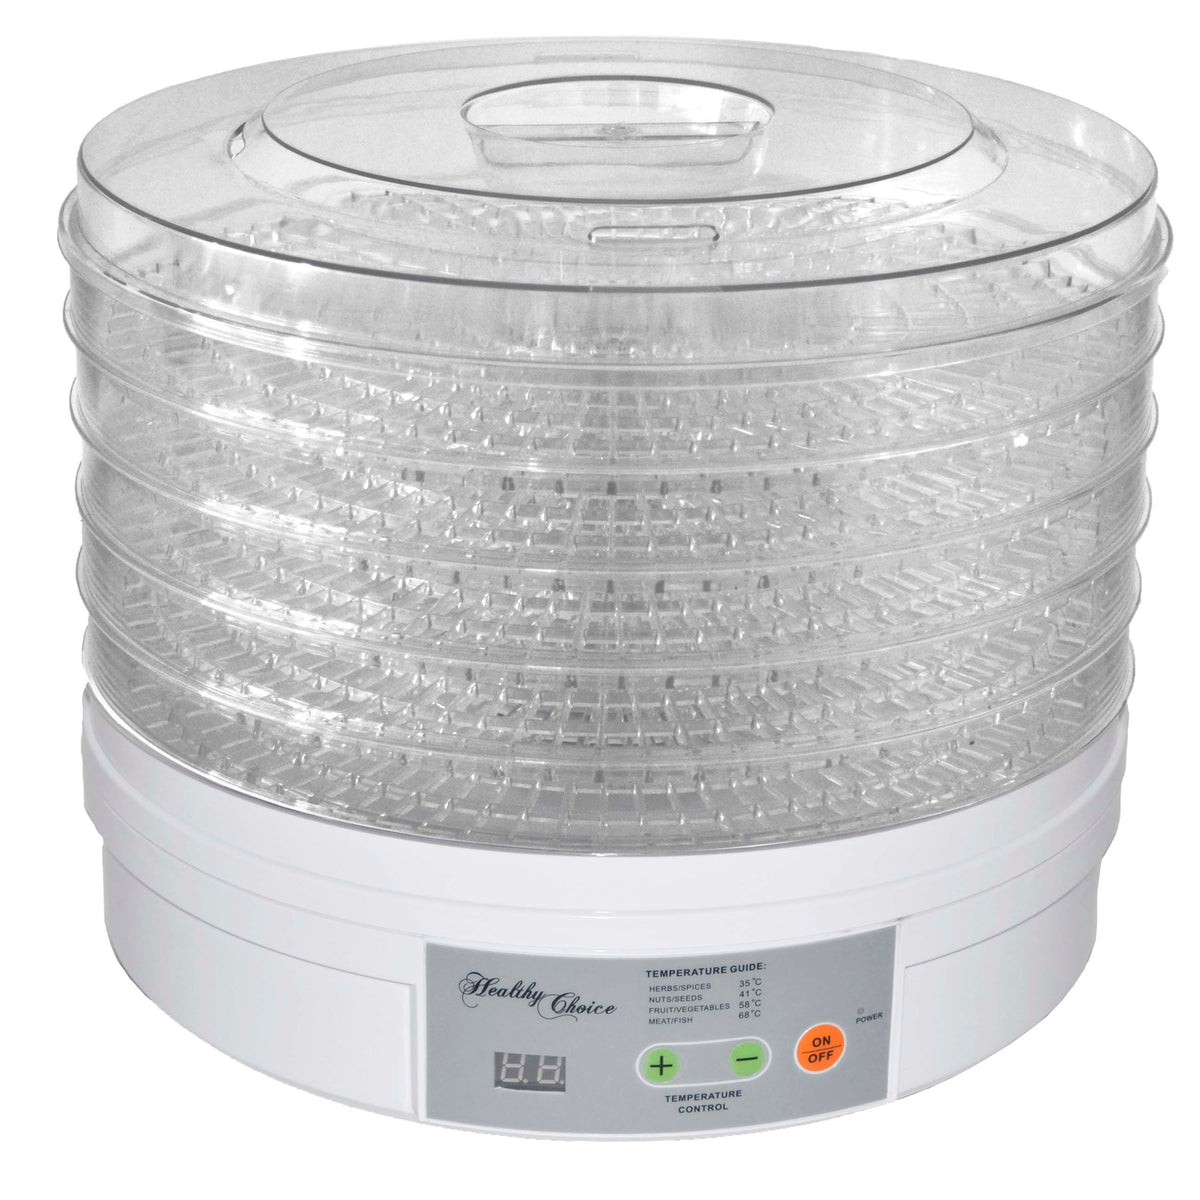 Front view of the round food dehydrator.